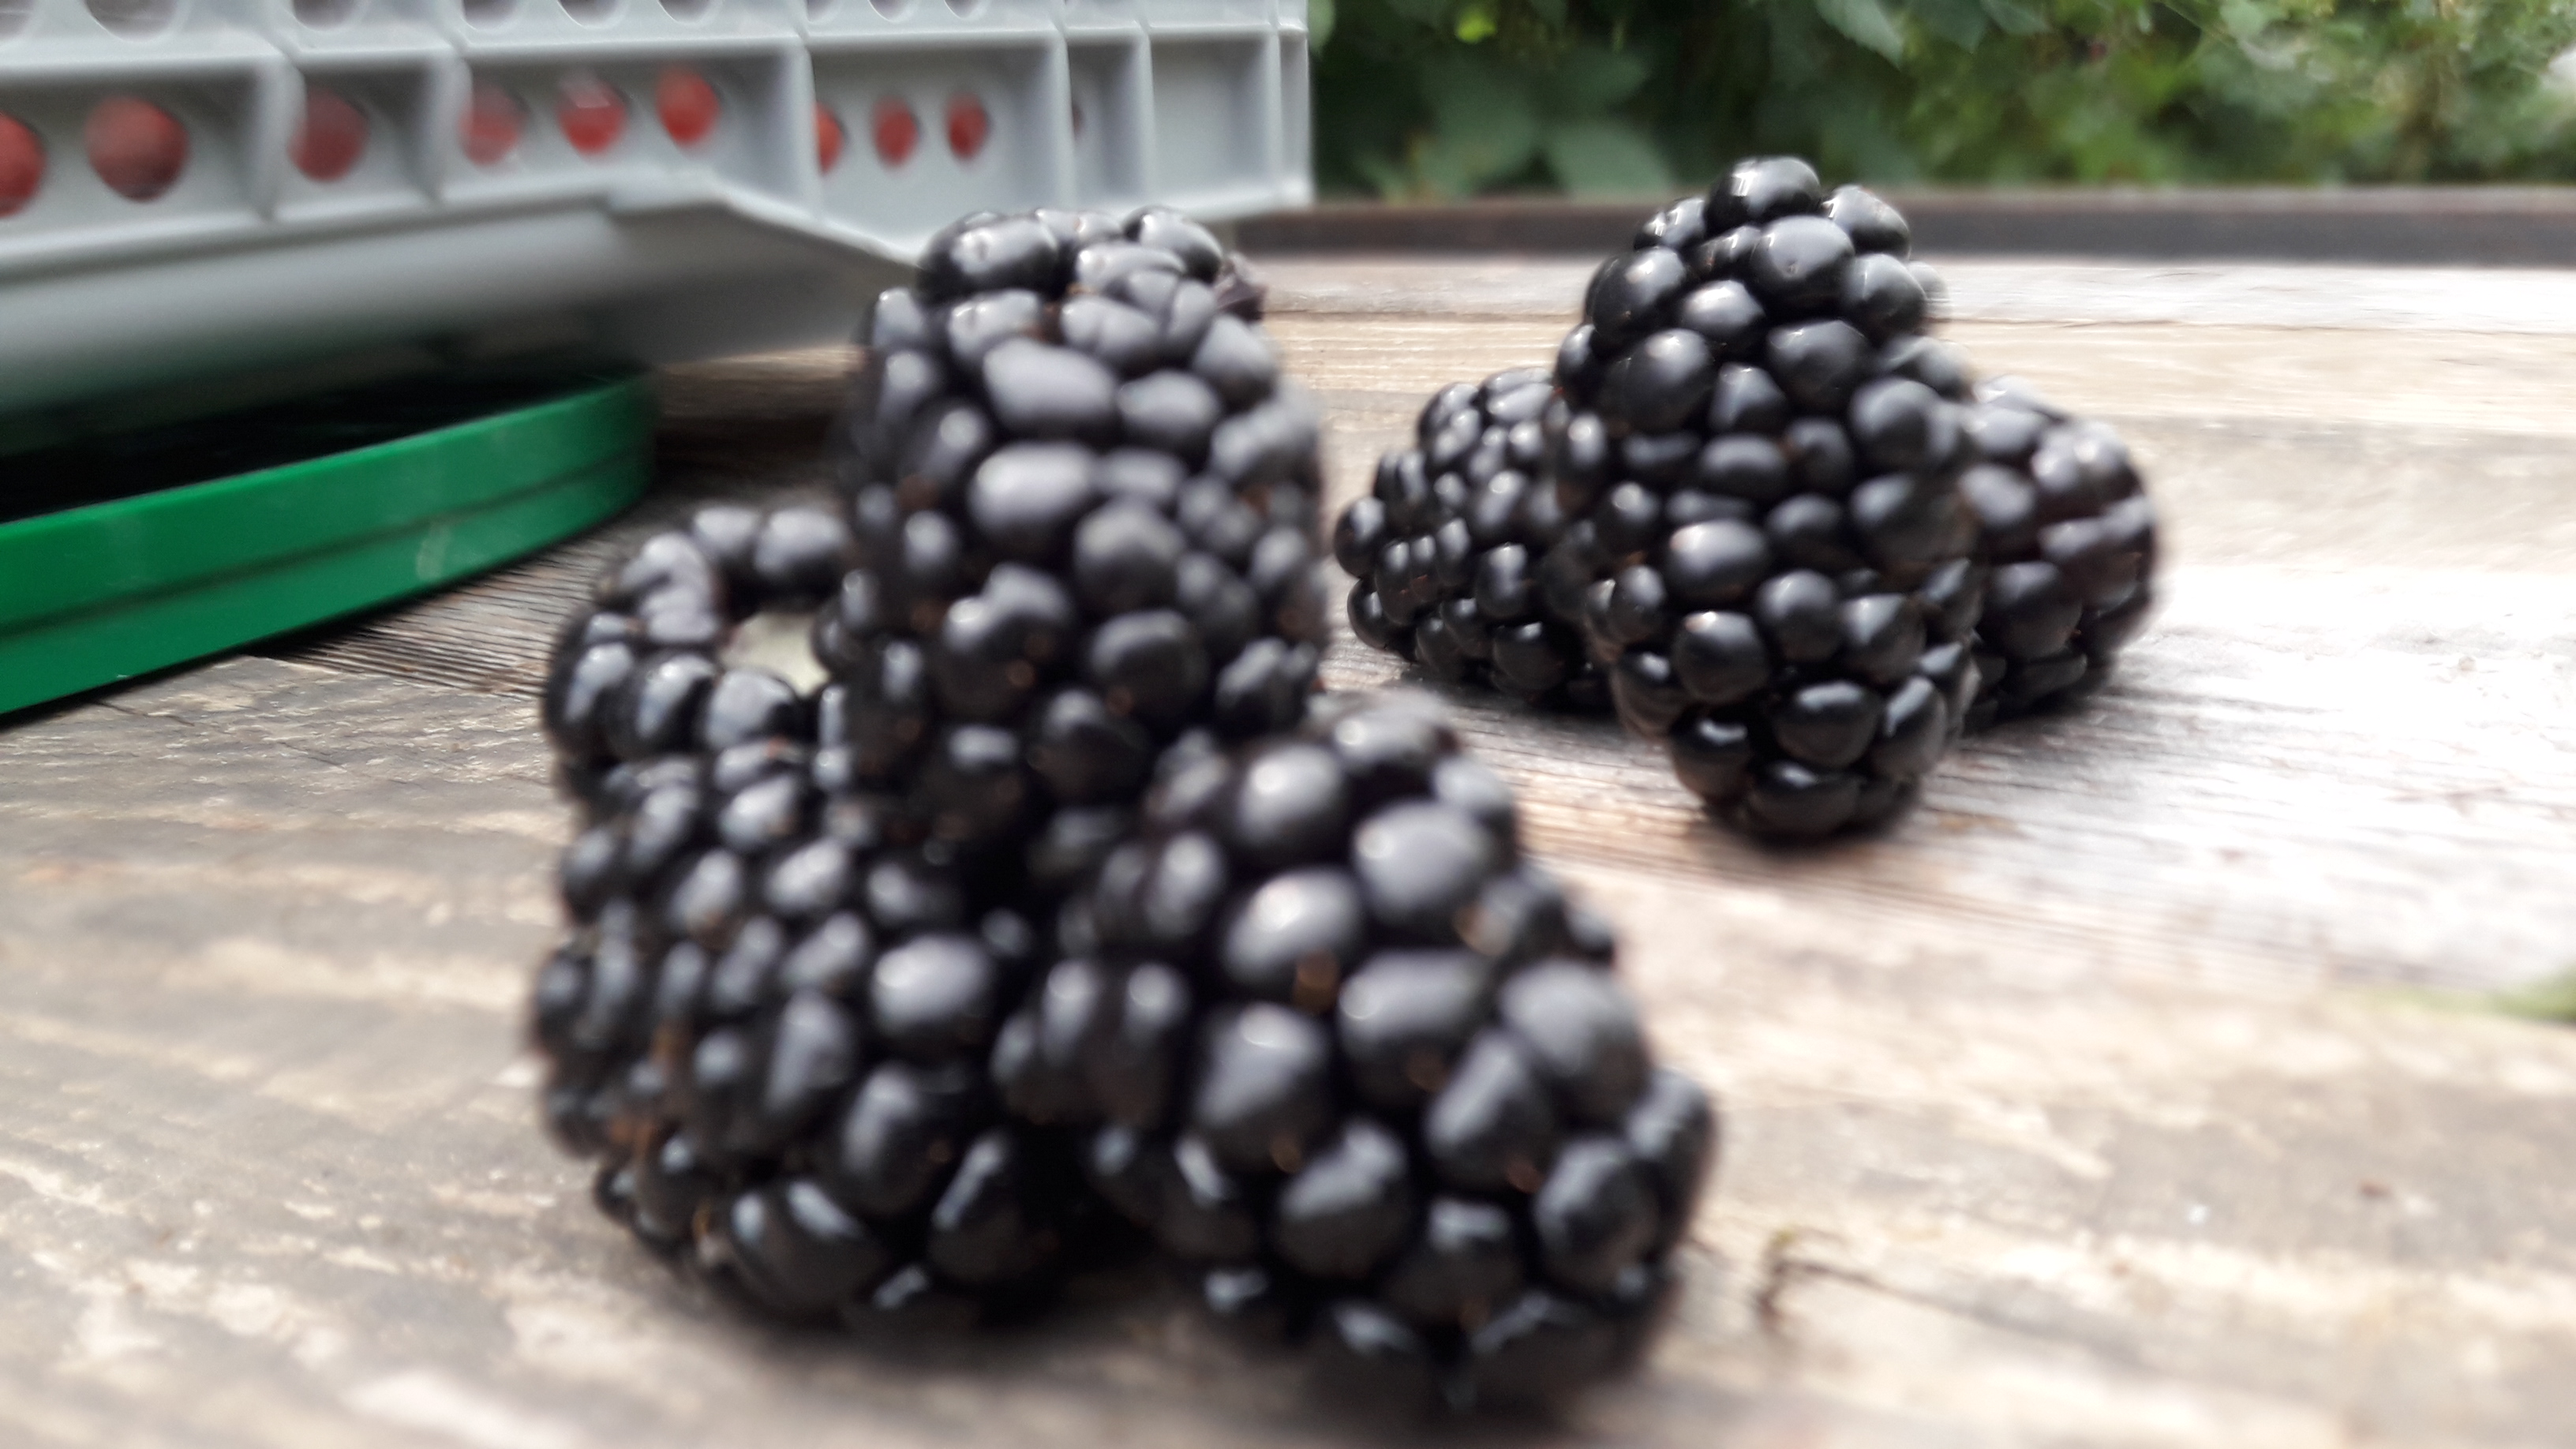 TIME TO SELECT BLACKBERRIES